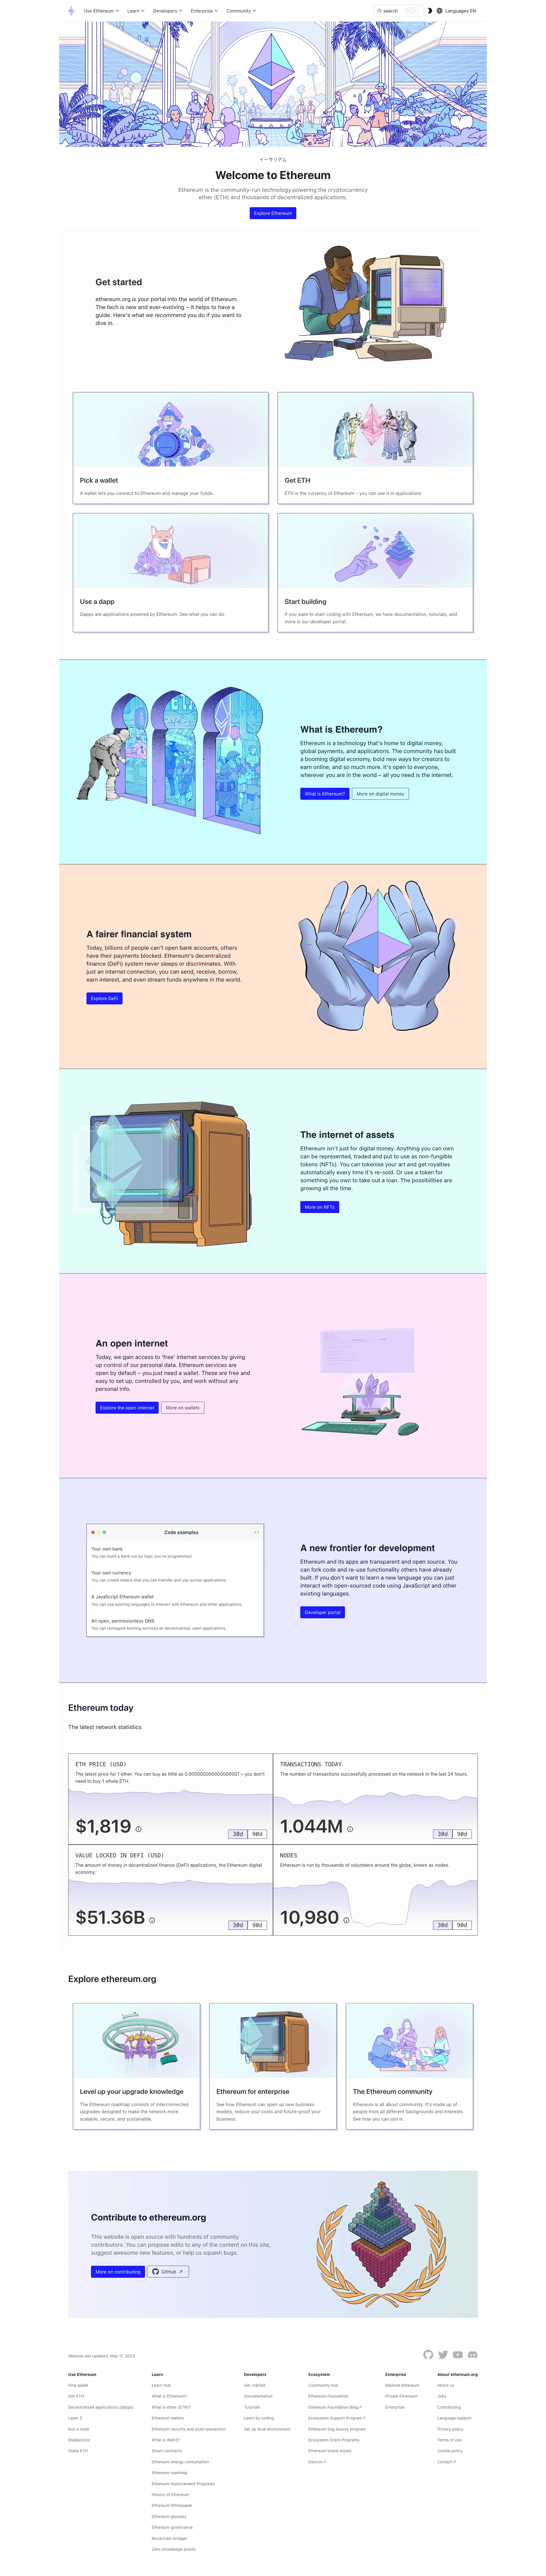 Ethereum Landing Page Example: Ethereum is a global, decentralized platform for money and new kinds of applications. On Ethereum, you can write code that controls money, and build applications accessible anywhere in the world.